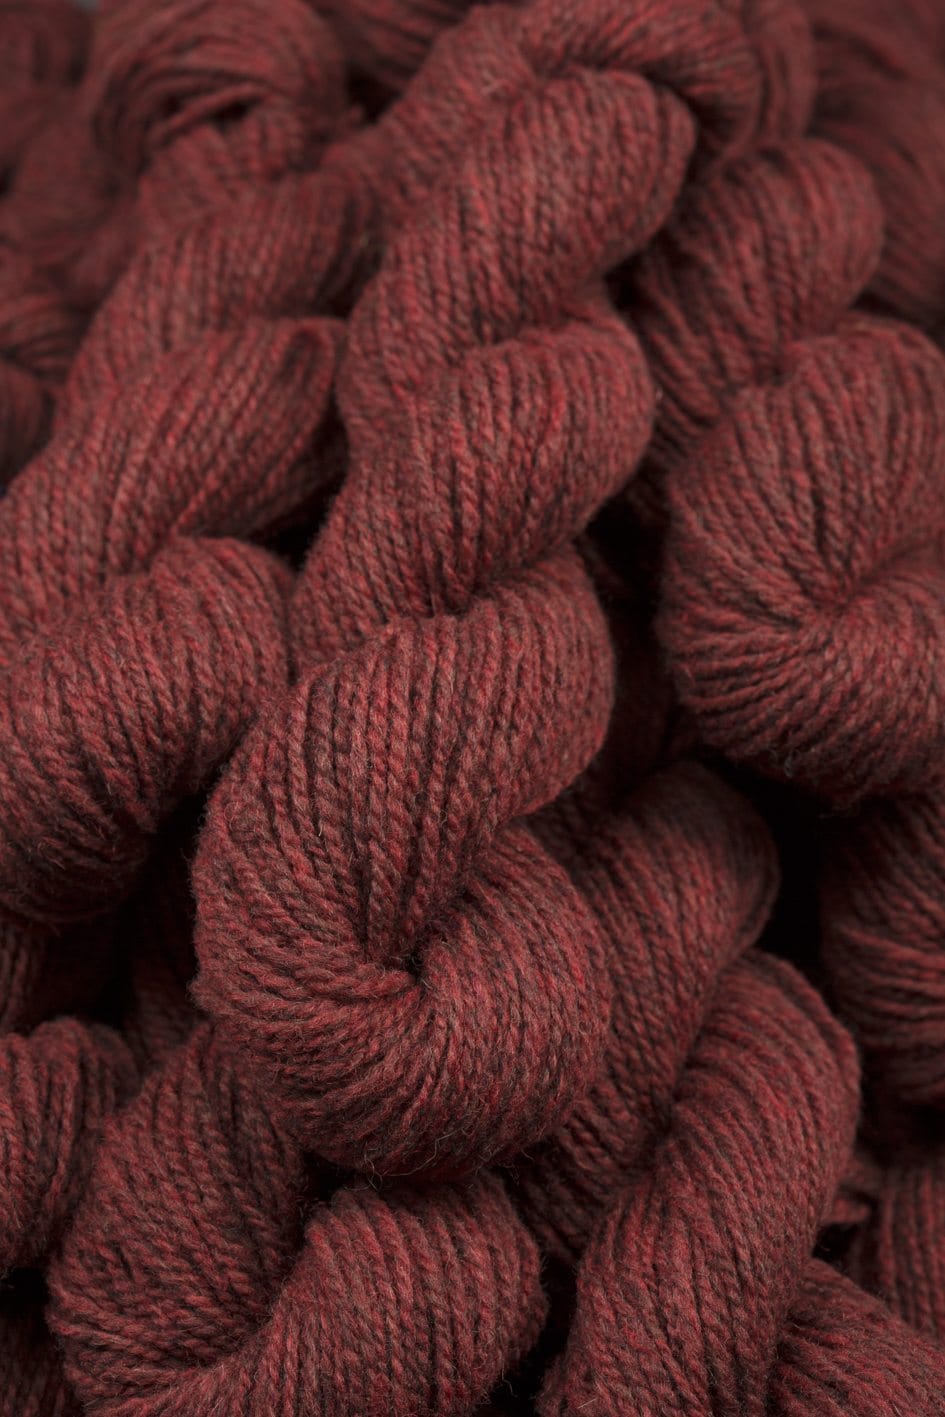 Alice Starmore Hebridean 2 Ply pure new British wool hand knitting Yarn in Red Deer colour